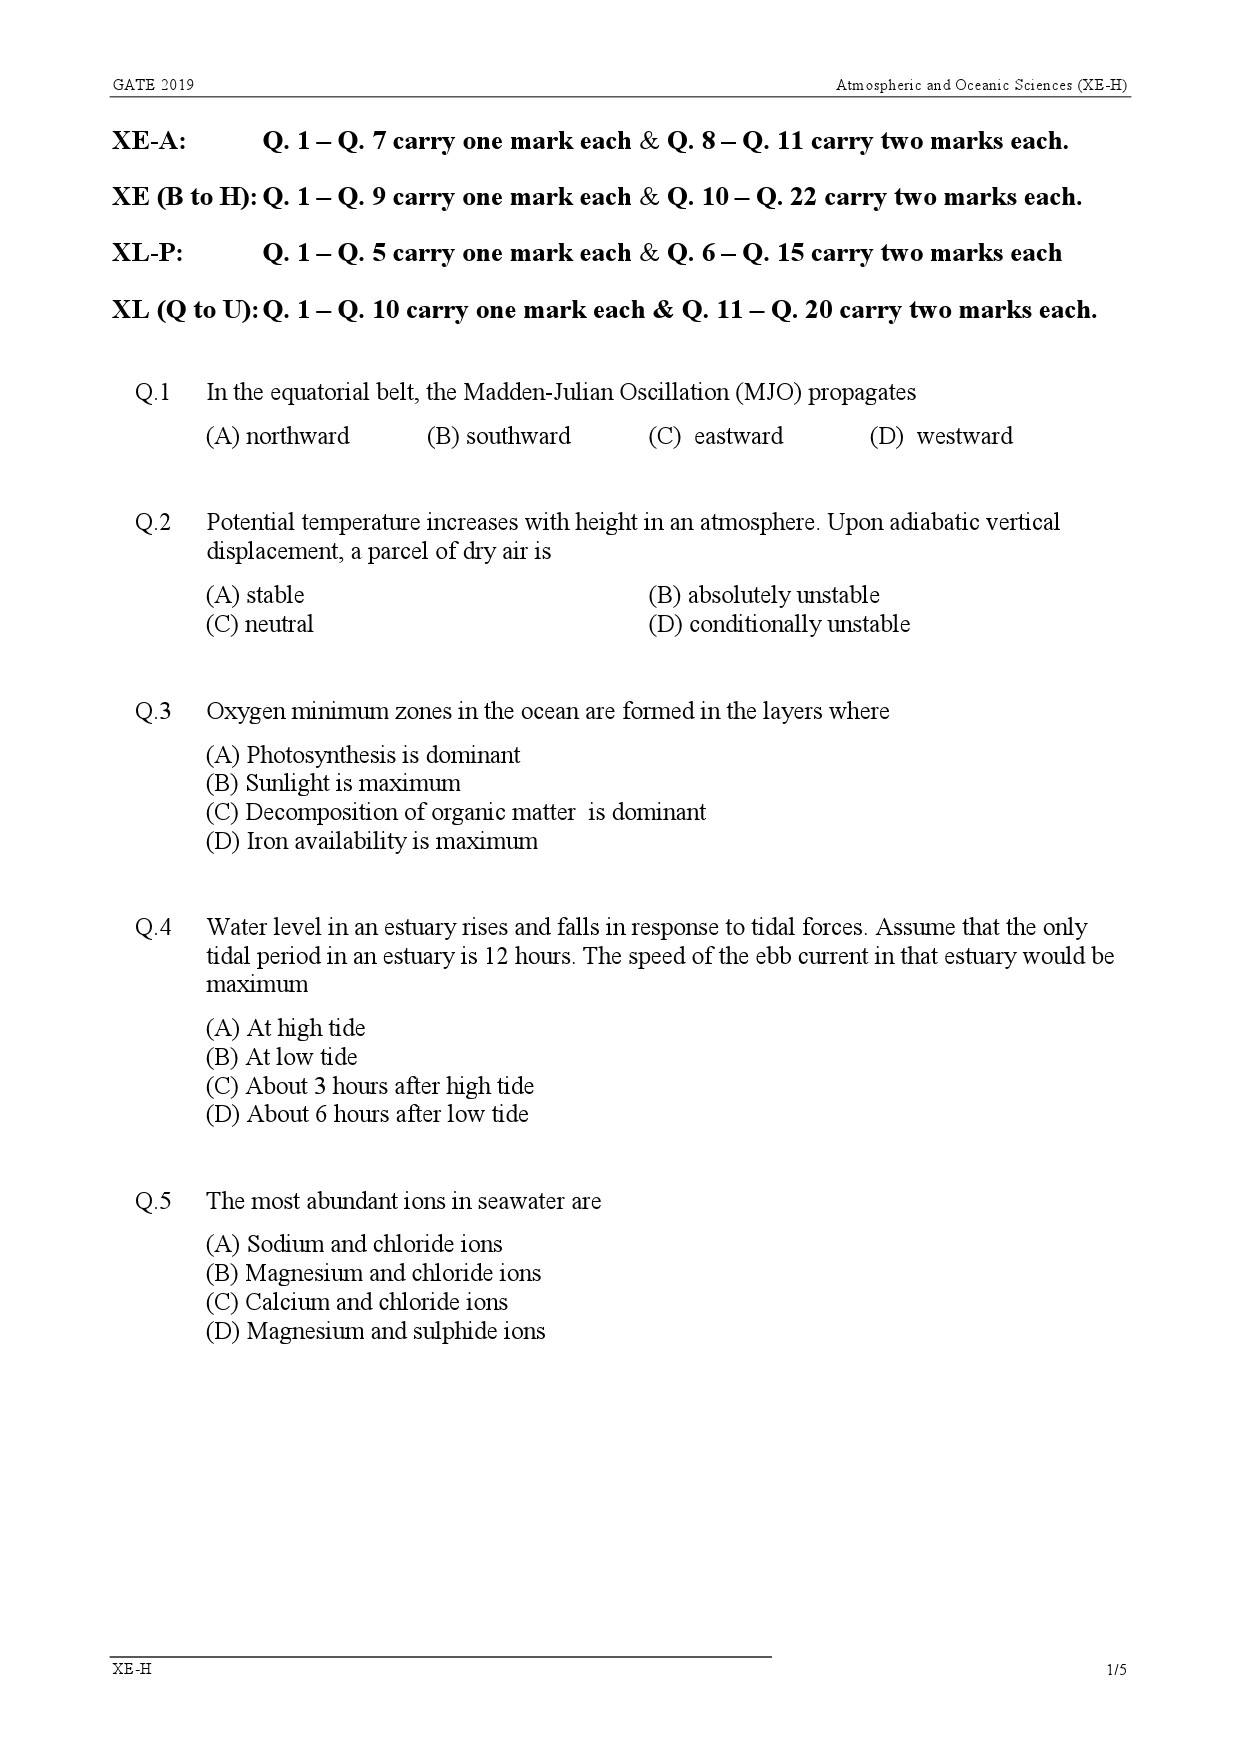 GATE Exam Question Paper 2019 Engineering Sciences 36